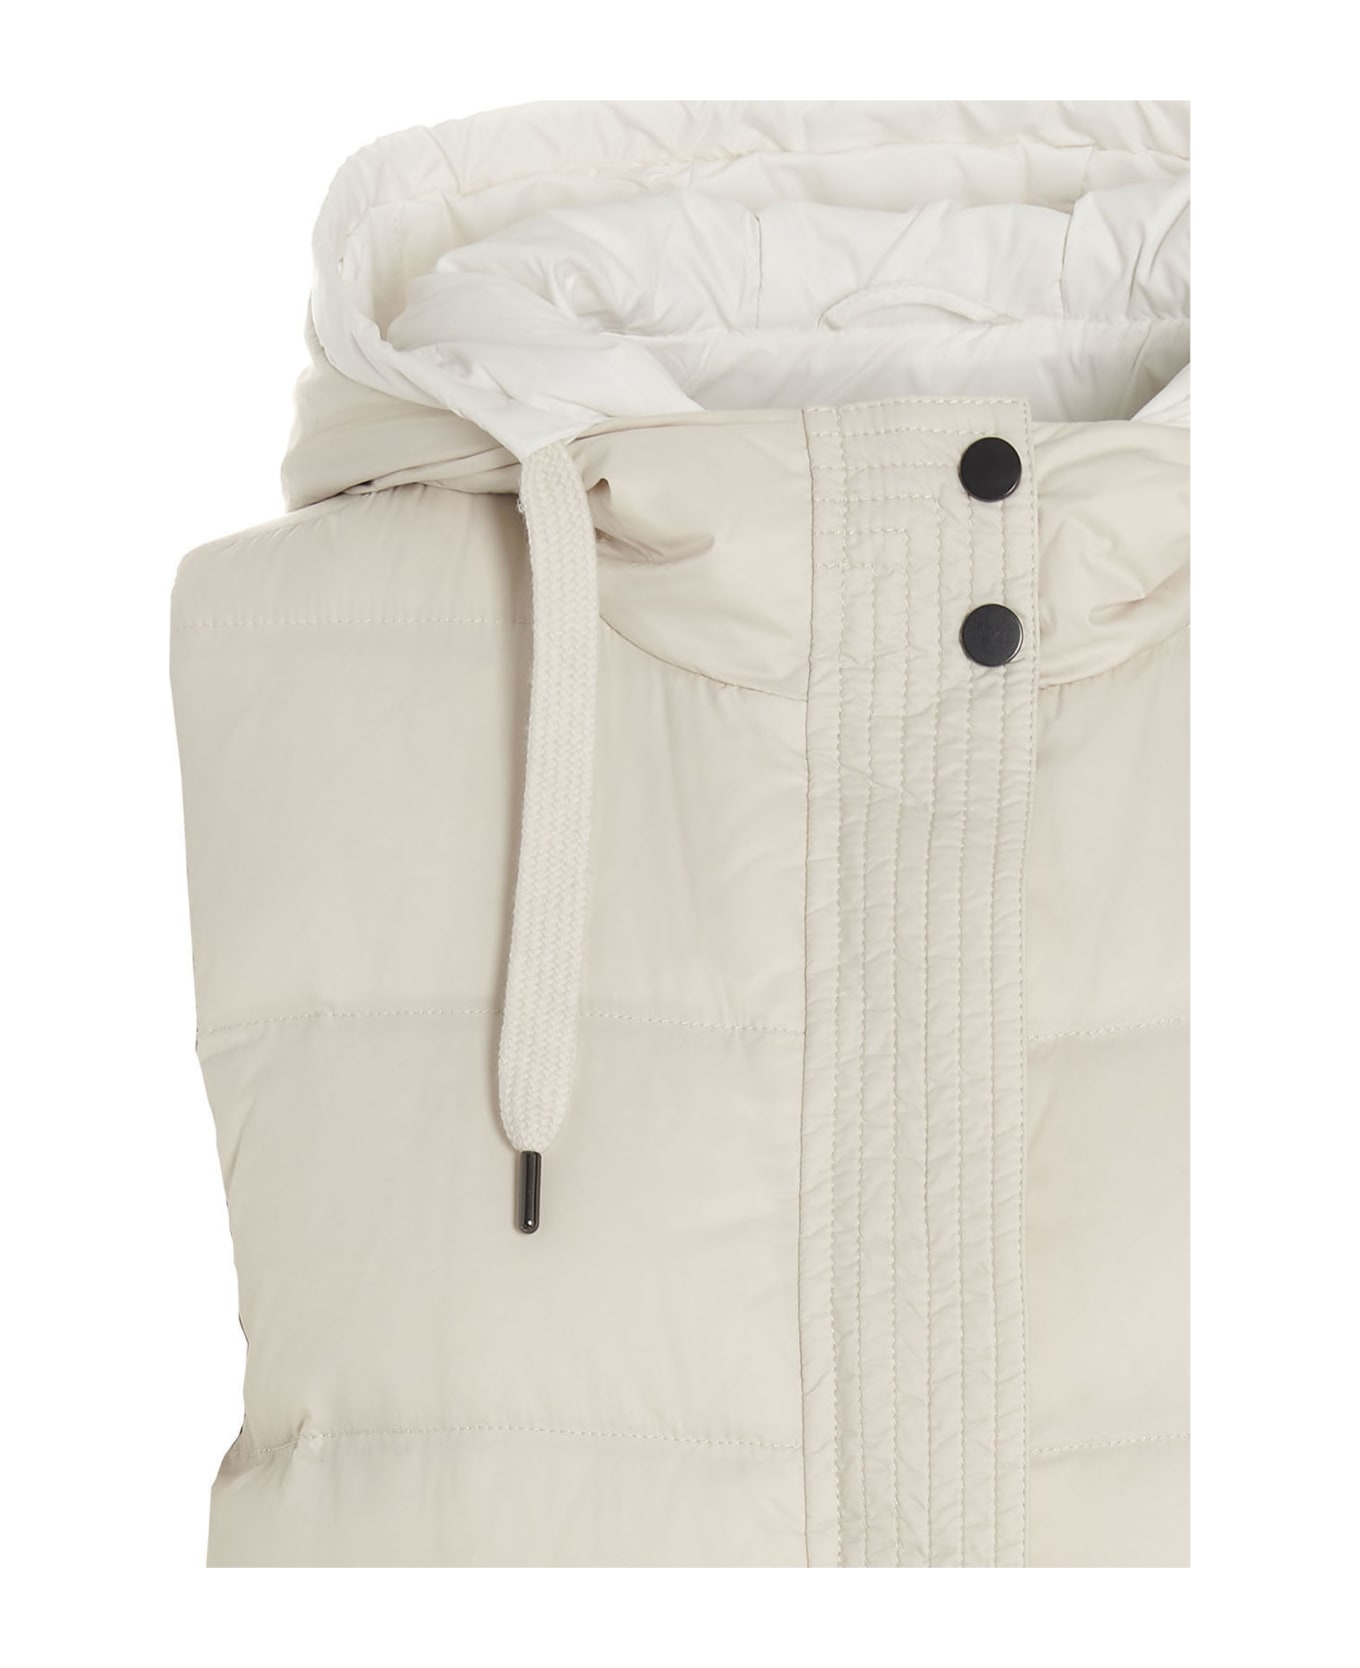 Brunello Cucinelli Sleeveless Down Jacket In Lightweight Nylon With Hood And Rows Of Brilliant Jewels Along The Closure - White